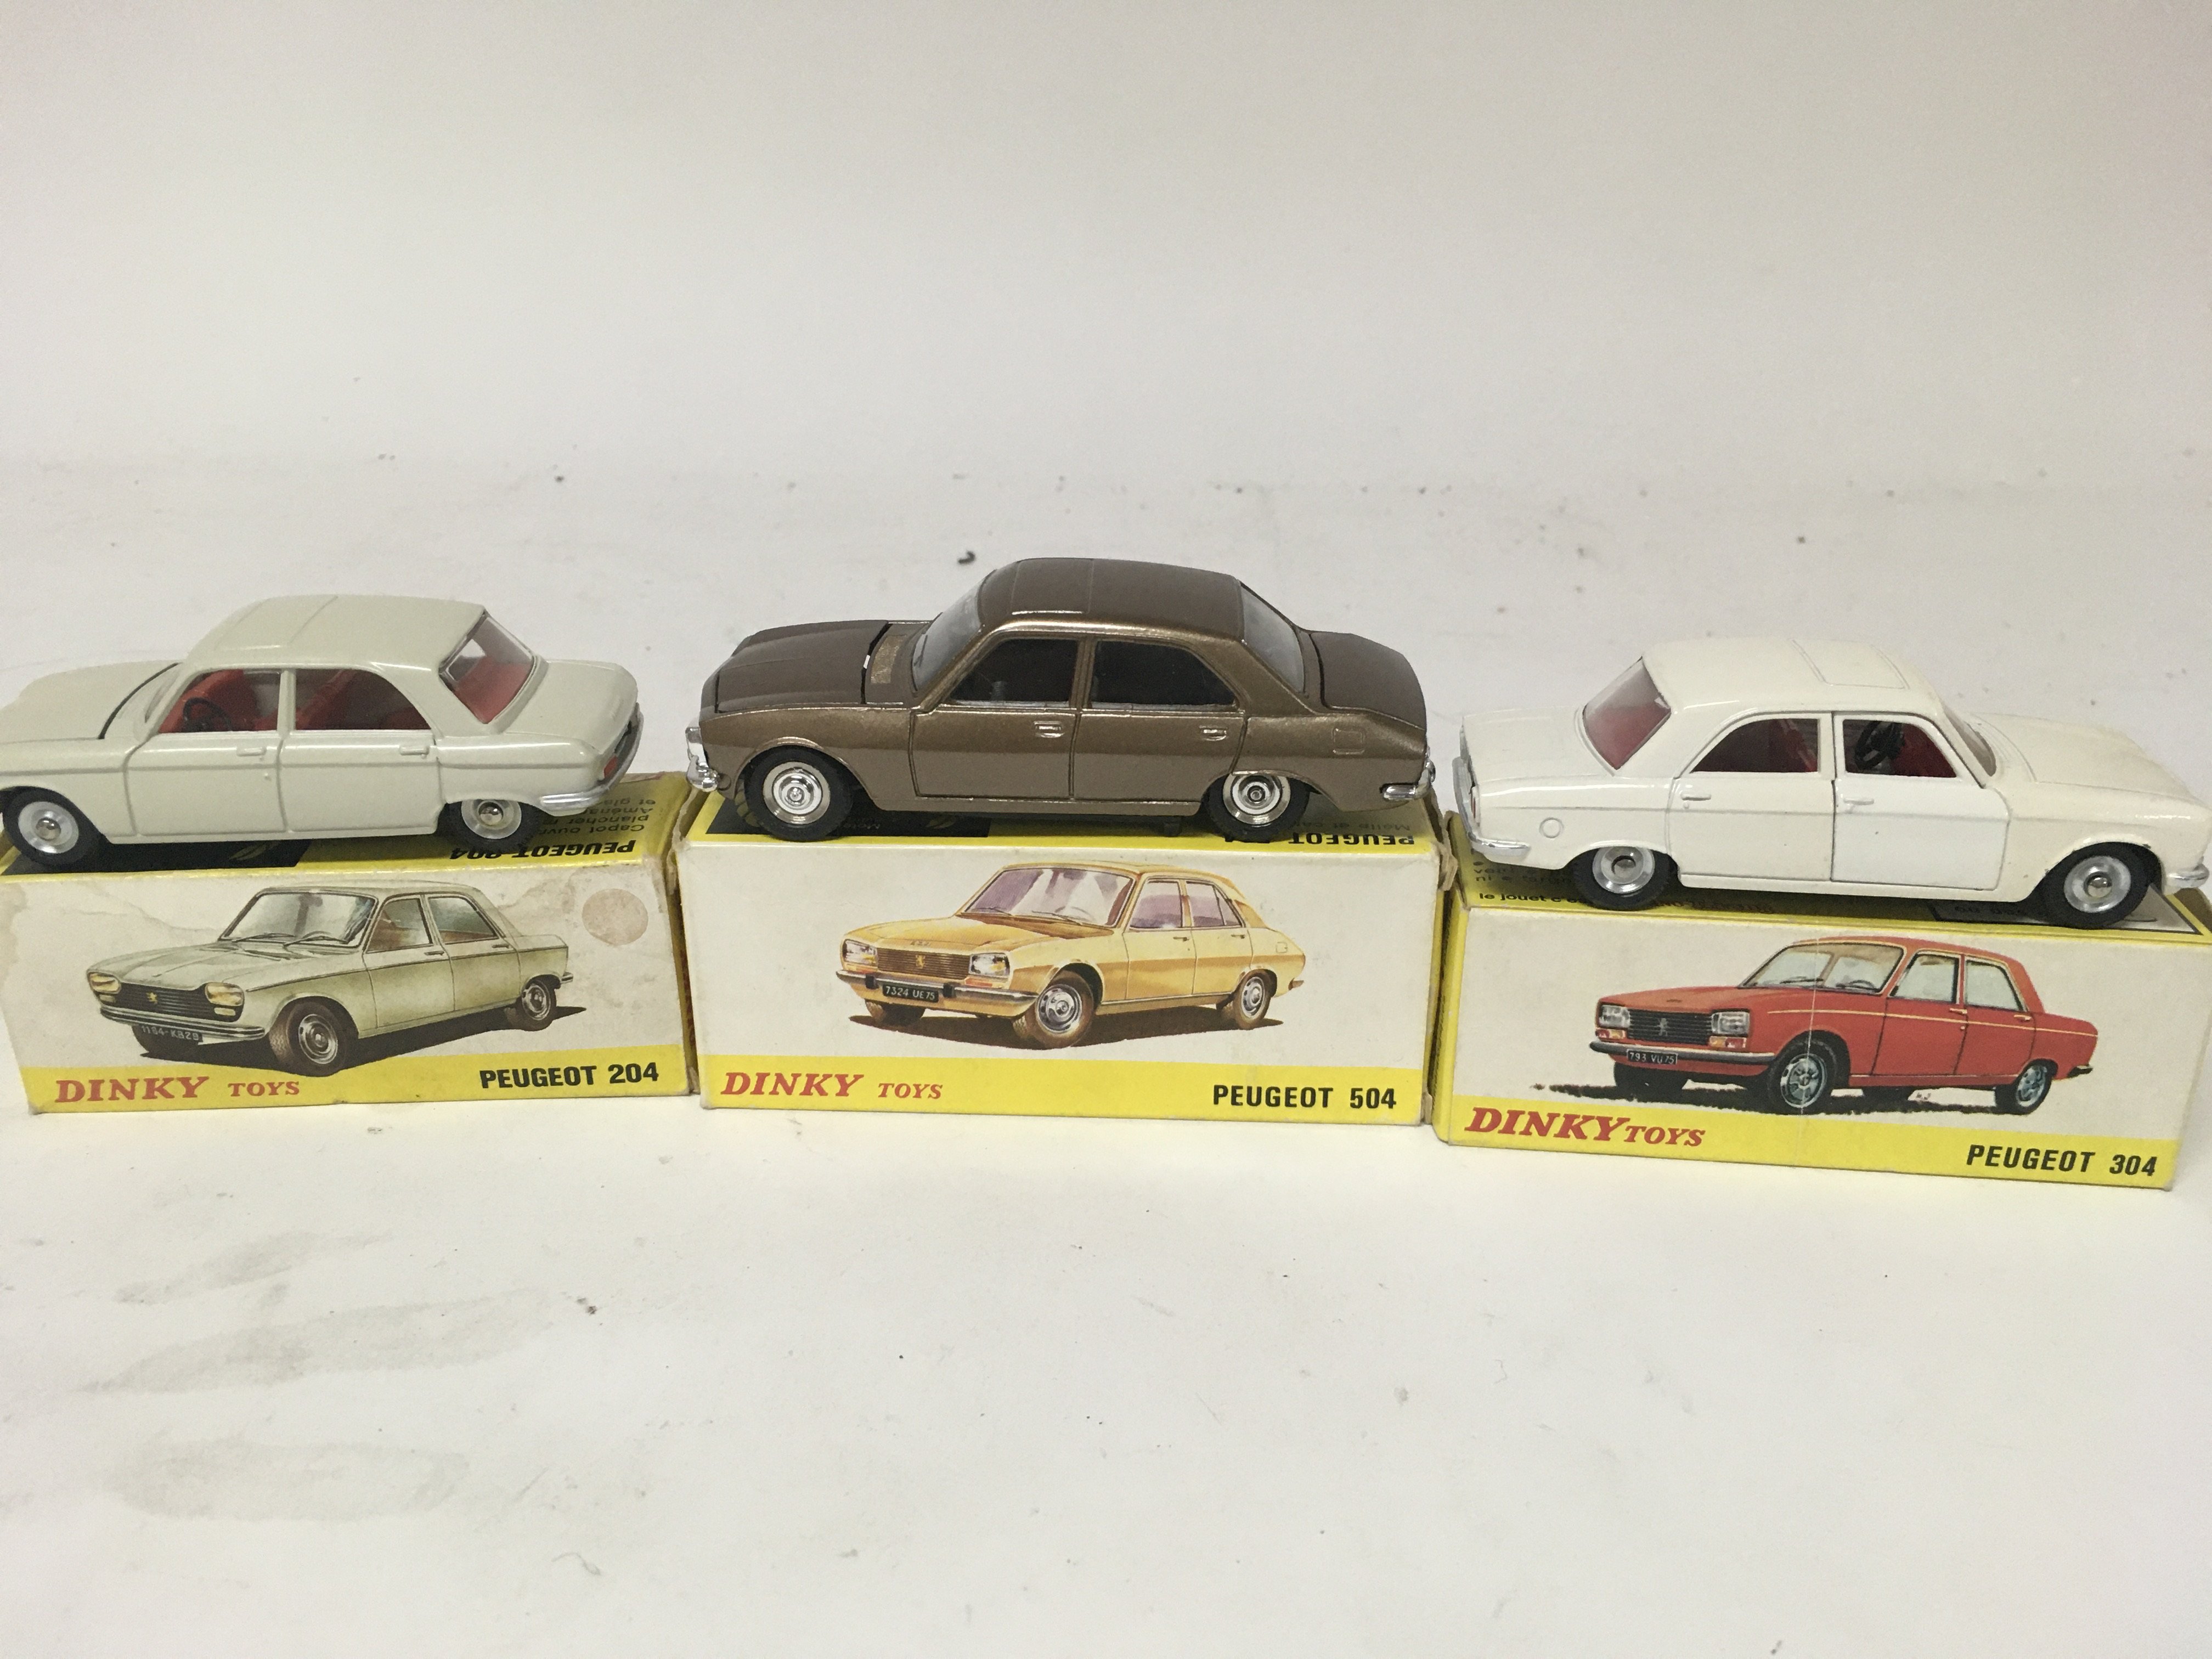 Dinky toys, #510 Peugeot 204, #011452 Peugeot 504 and #1428 Peugeot 304, boxed